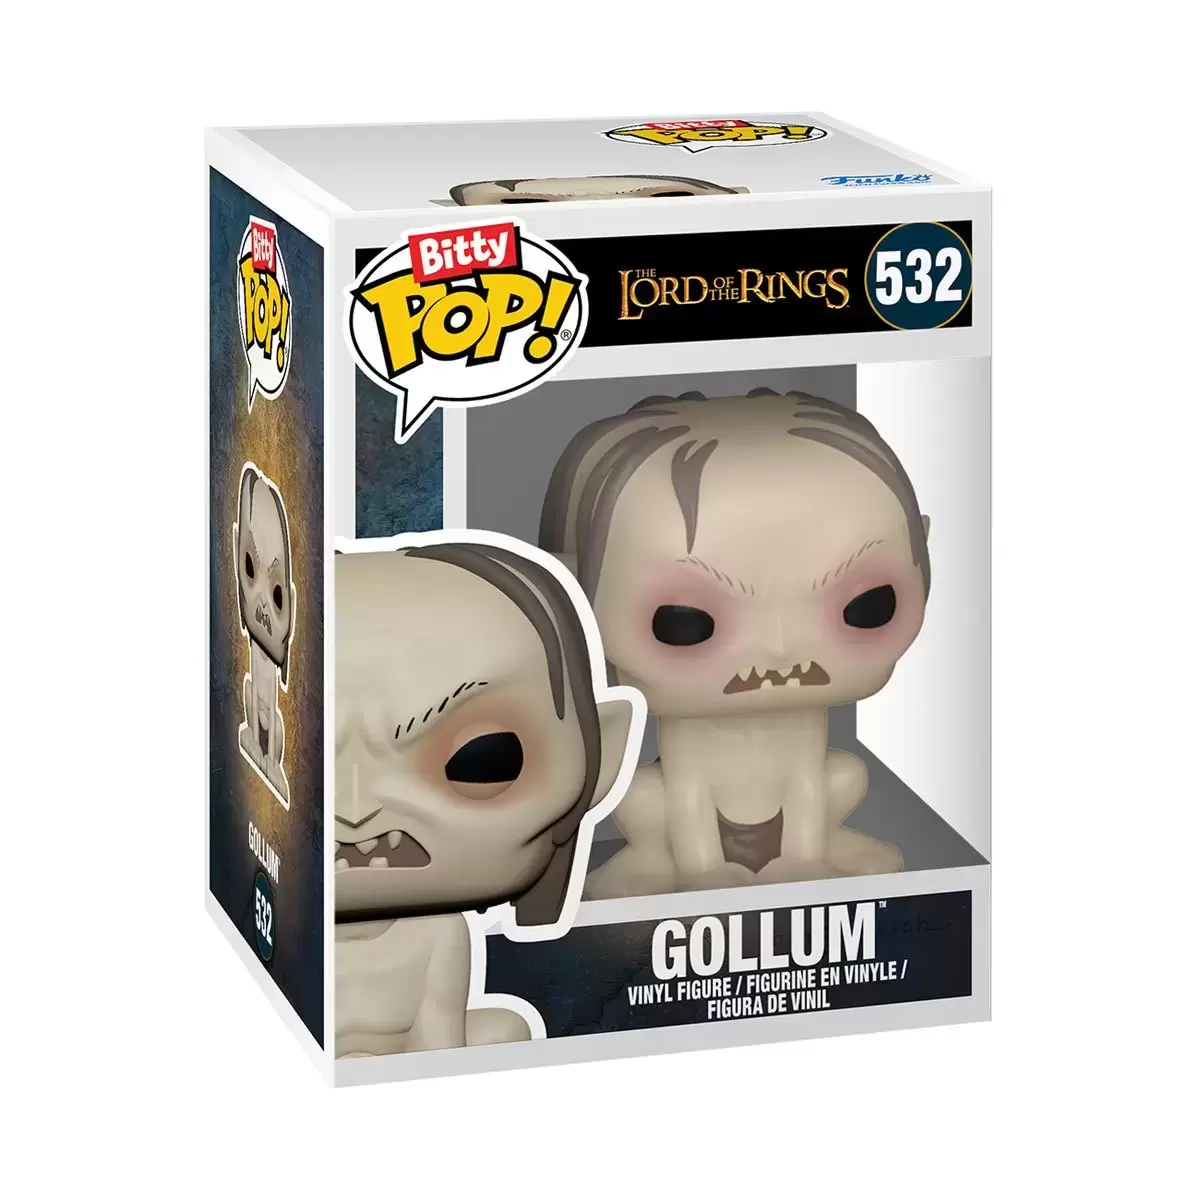 Bitty POP! - Lord of The Rings - Gollum